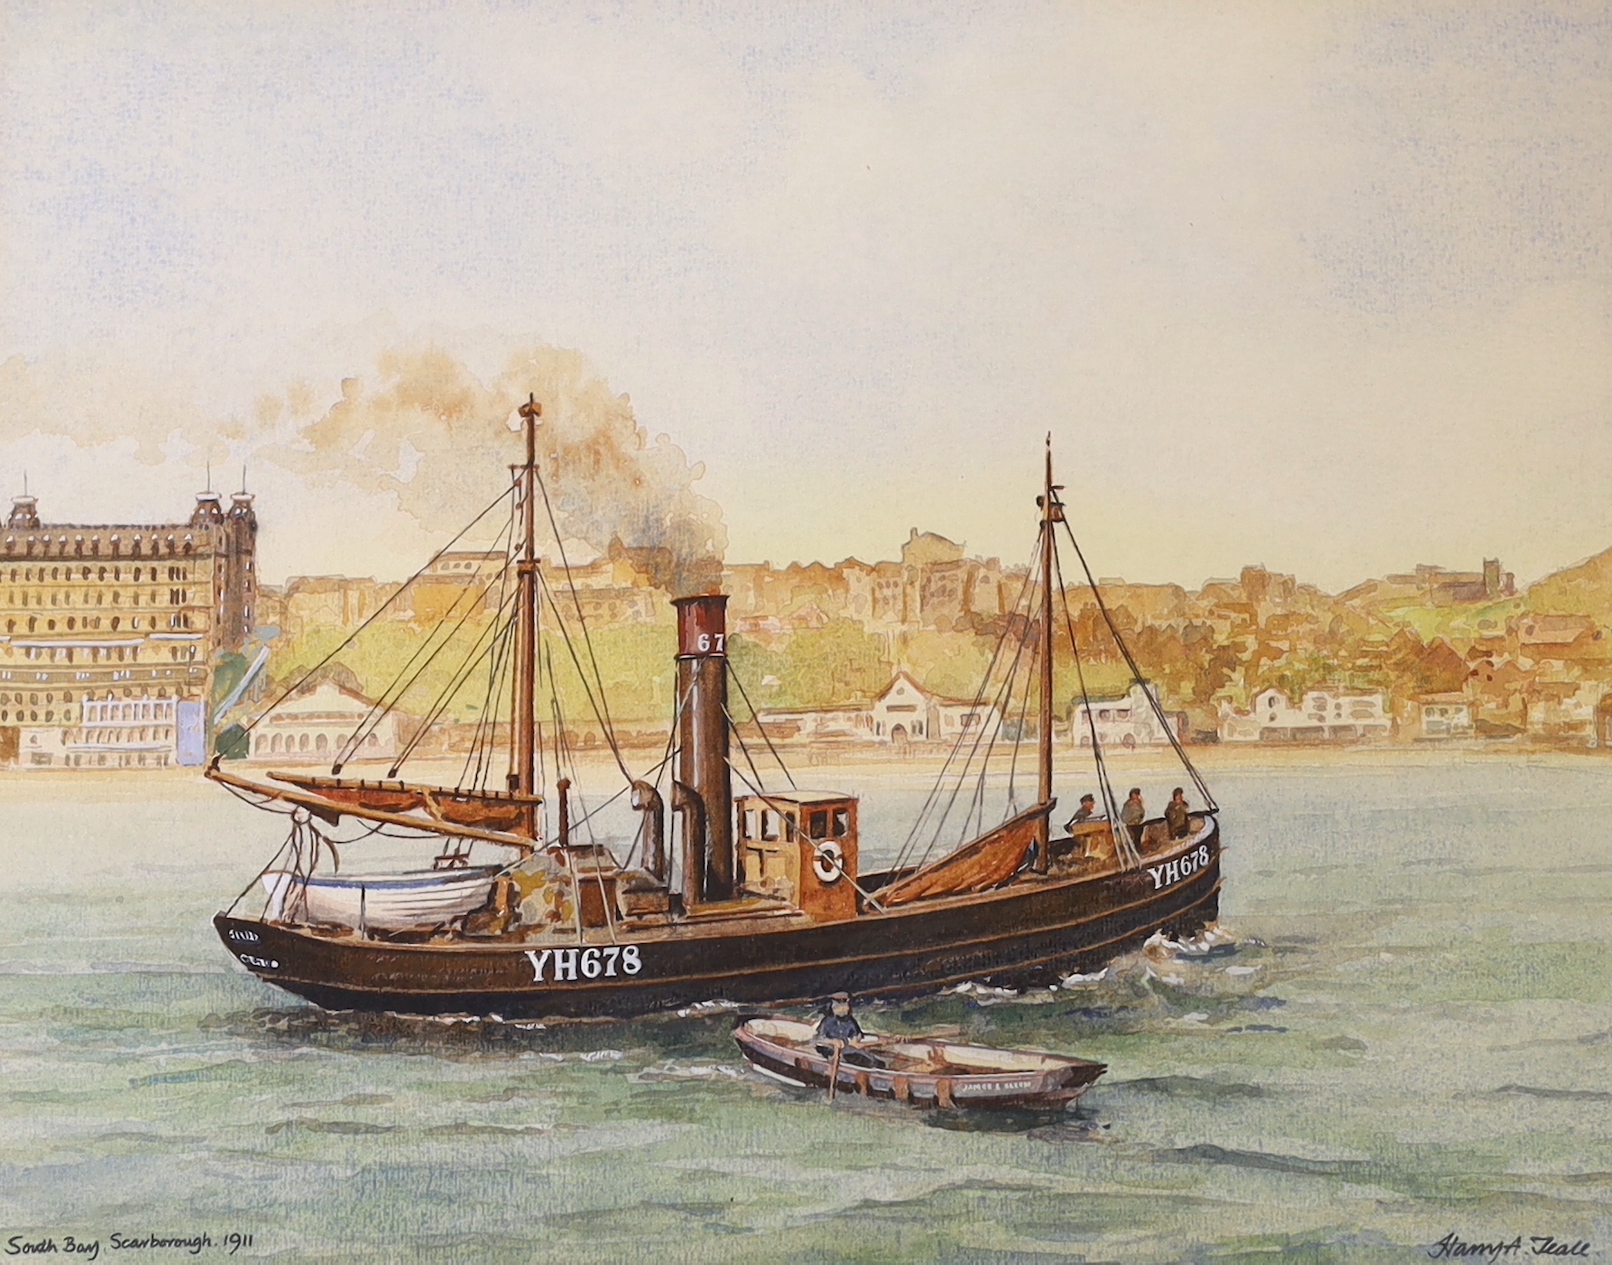 Harry A Teale (20th century) heightened watercolour, 'The Yarmouth steam drifter YH678 in South Bay, Scarborough', signed and dated 1911, 39 x 31cm